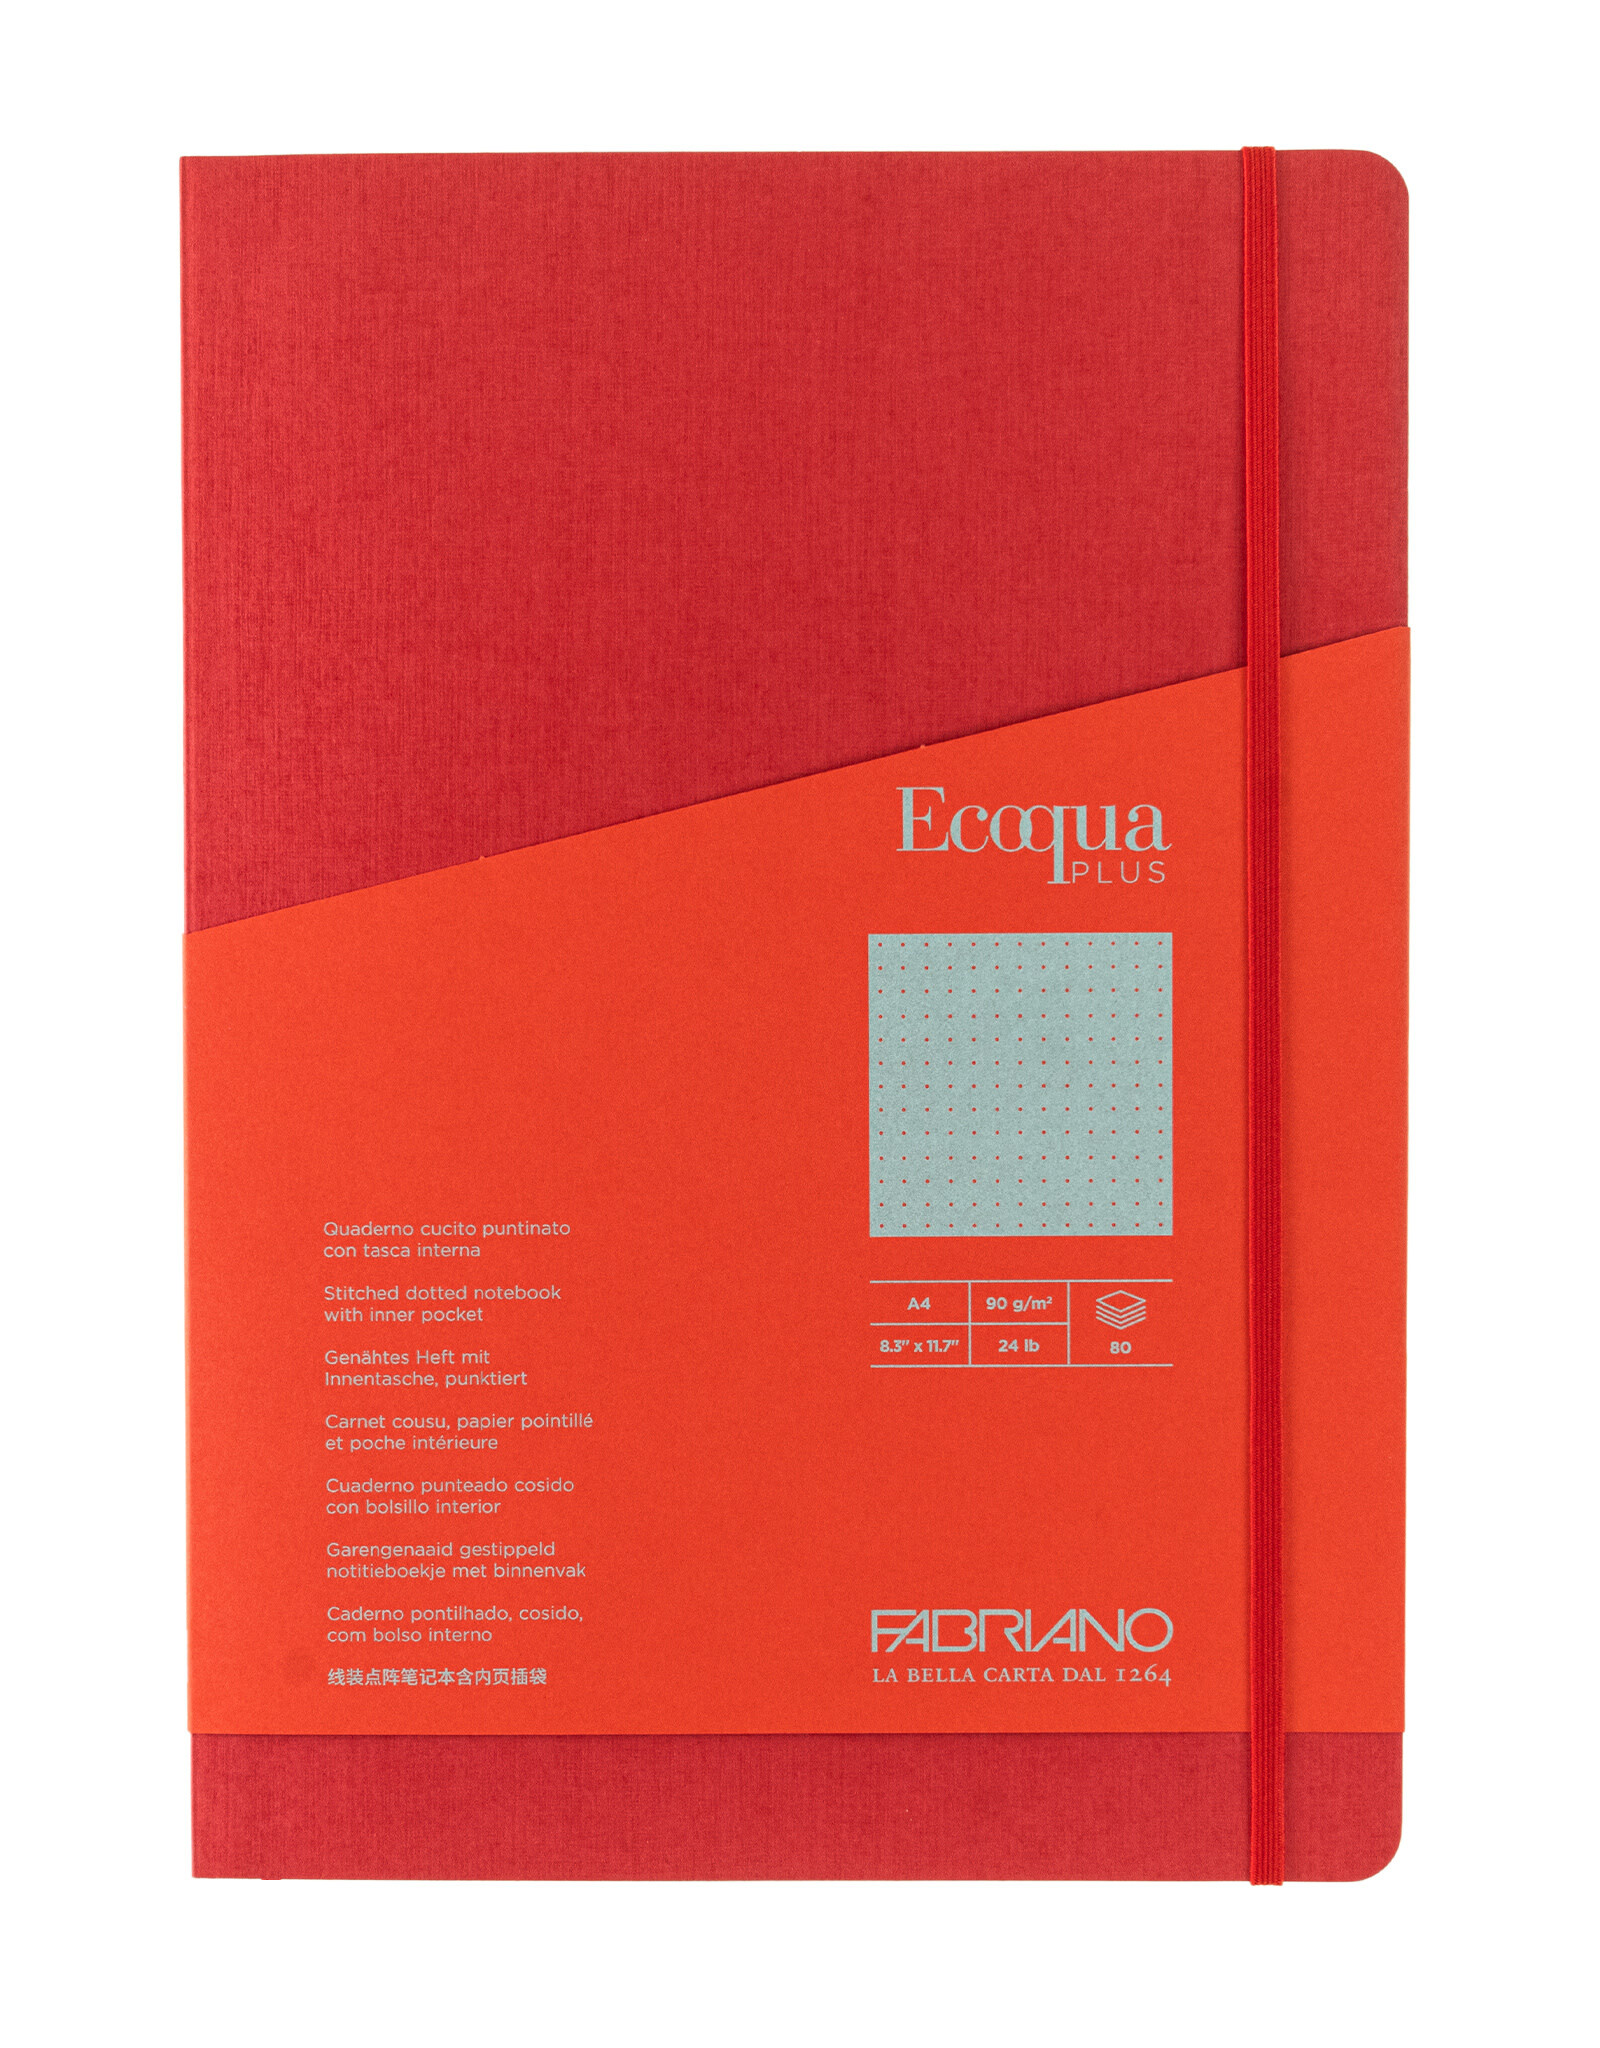 Ecoqua Plus Sewn Spine Notebook, Red, A4, Dotted